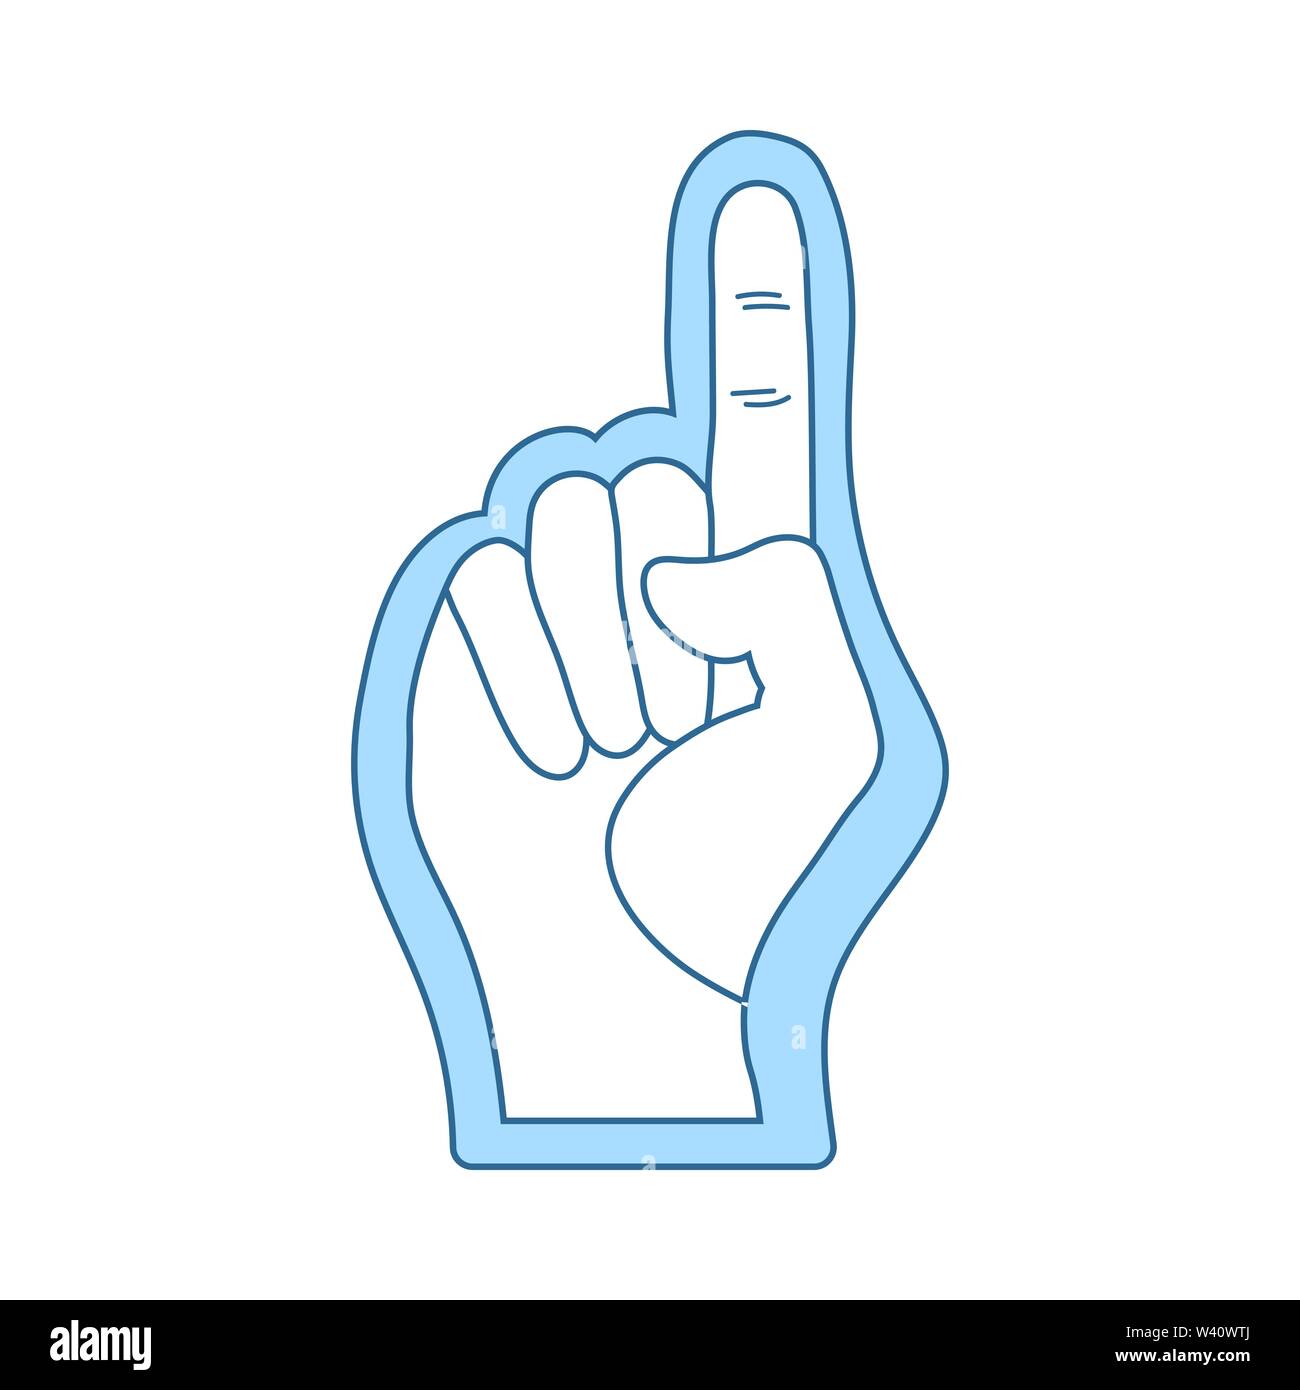 American Football Foam Finger Icon. Thin Line With Blue Fill Design. Vector Illustration. Stock Vector